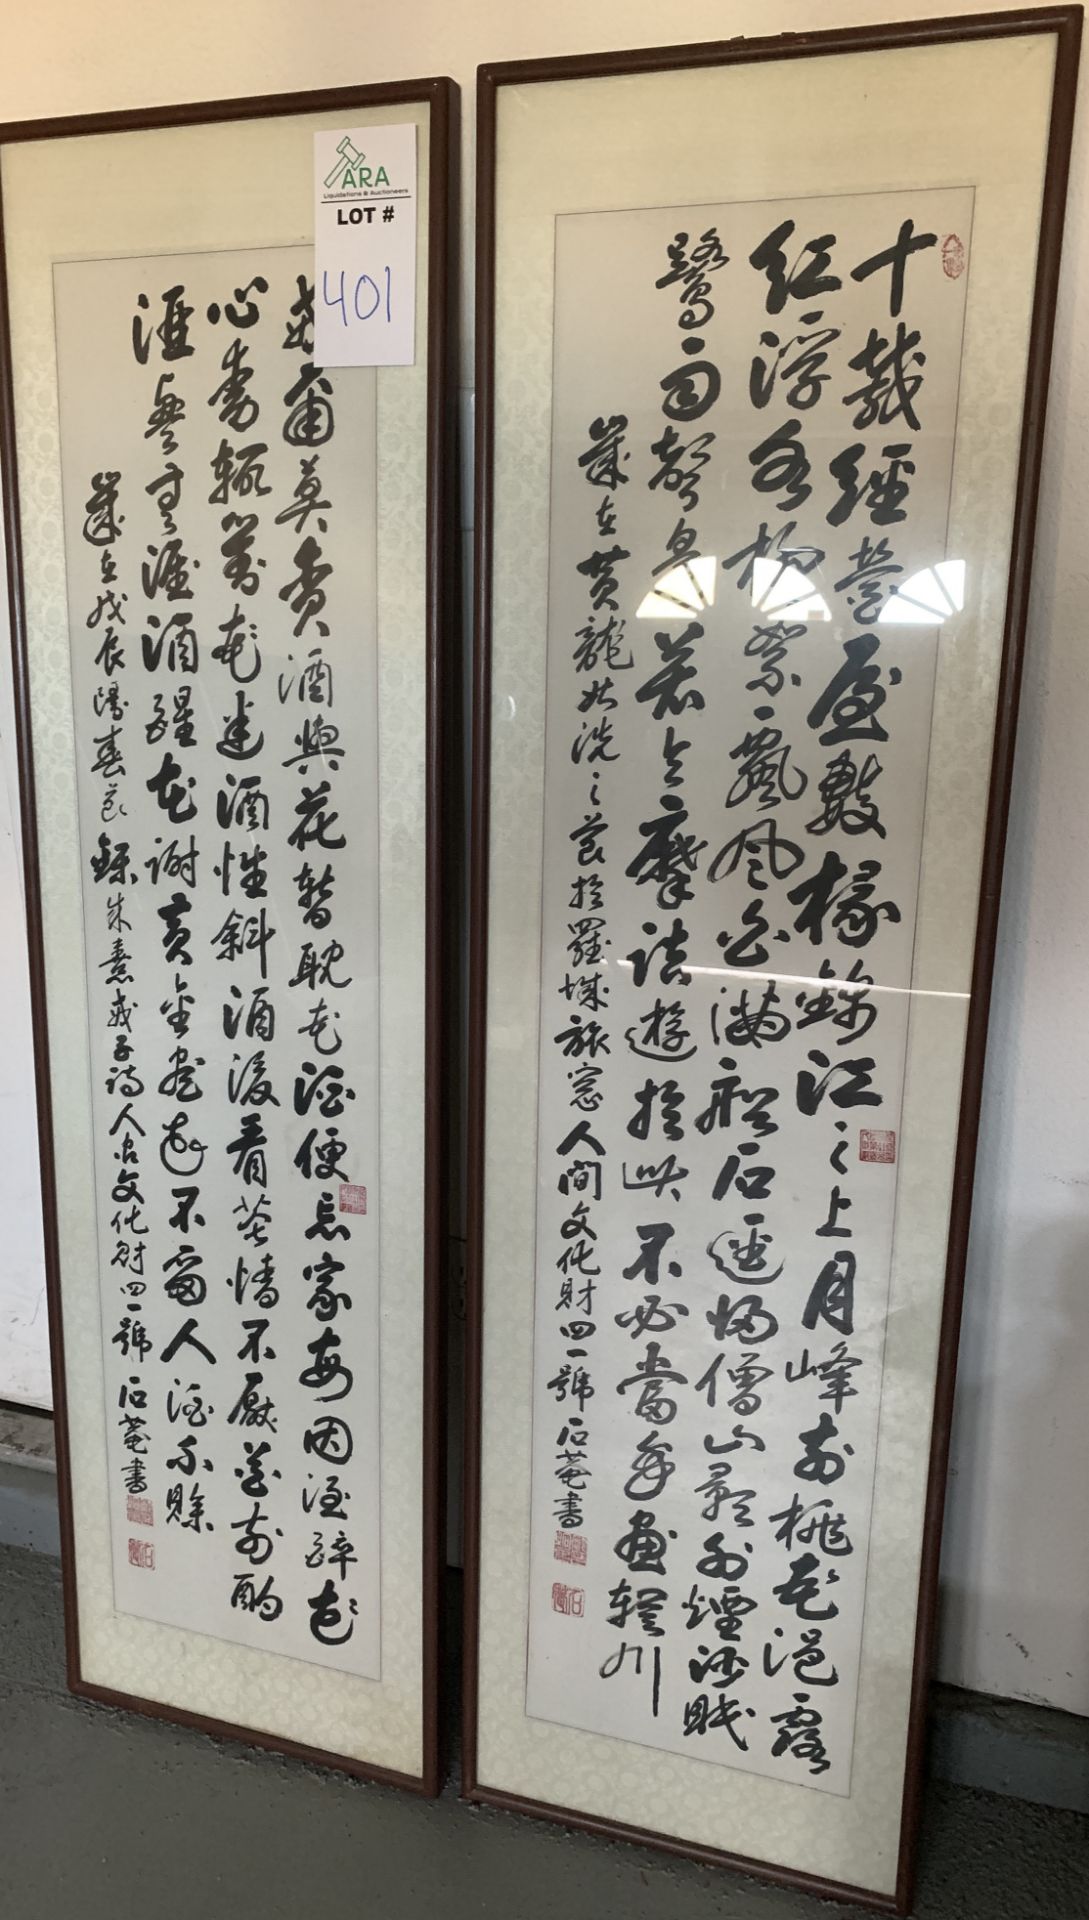 2 ART PIECES WITH ANCIENT CHINESE CHARACTER CALLIGRAPHY DETAILS.  DIMENSIONS EACH: 61X17" - Image 2 of 3